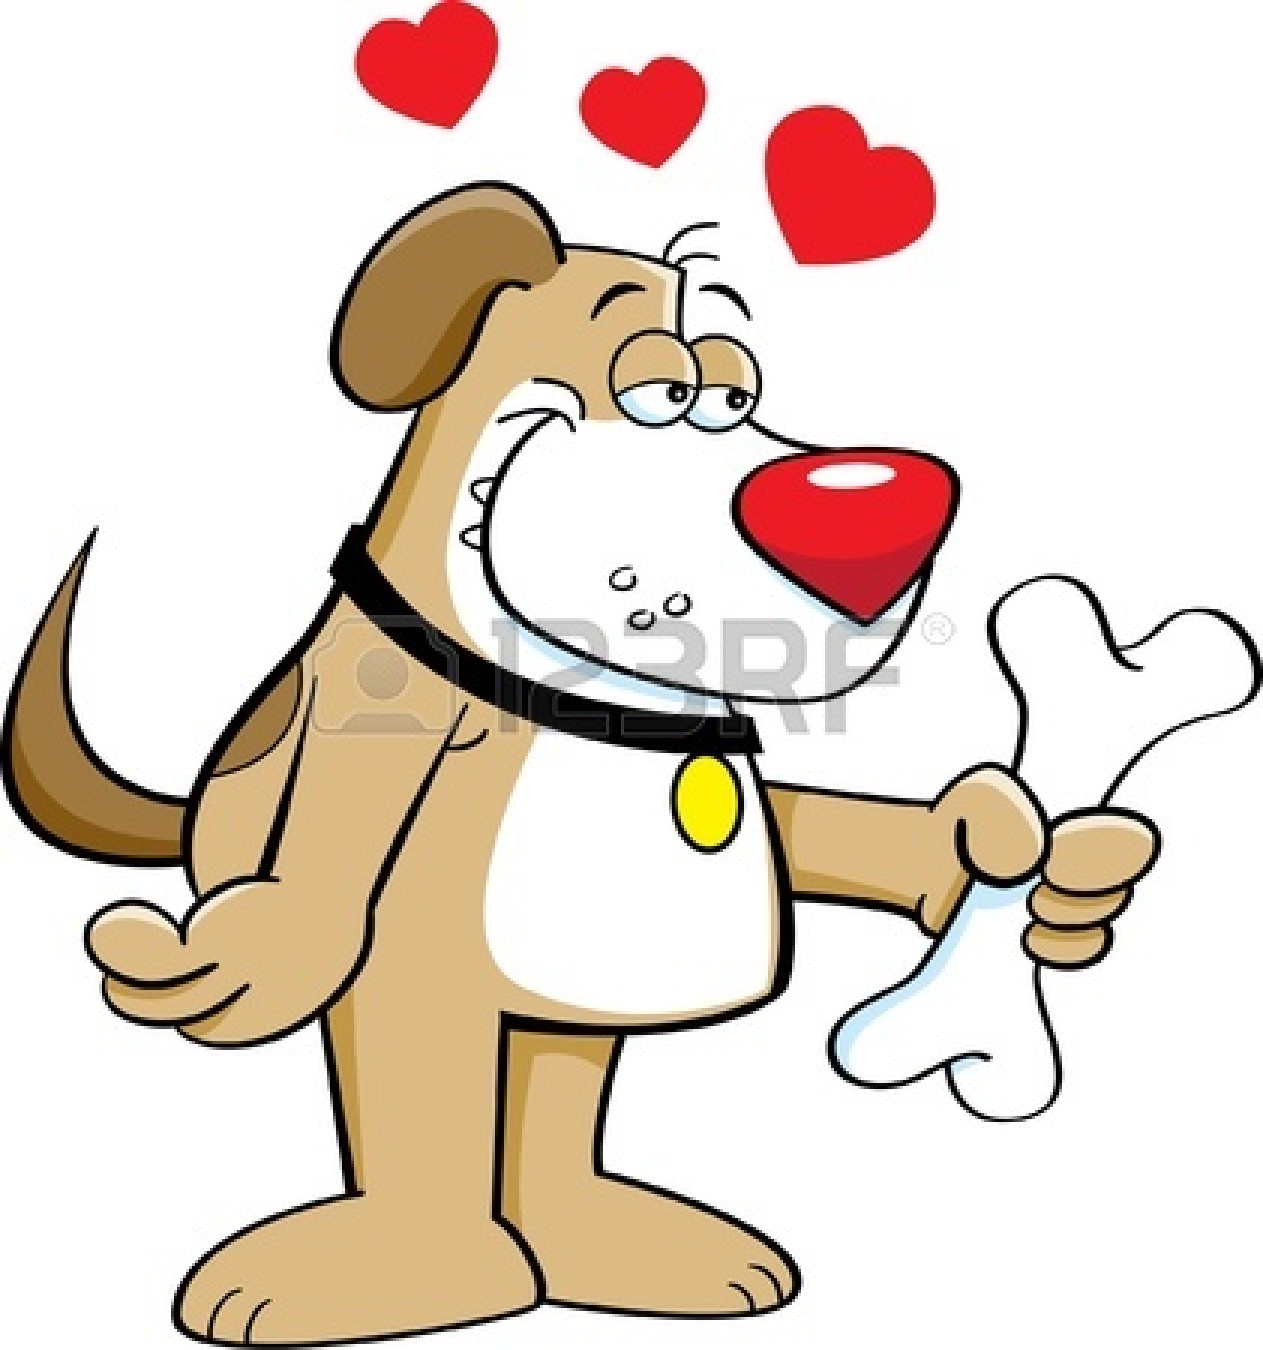 Cute Dog With Bone Clip Art   Clipart Panda   Free Clipart Images